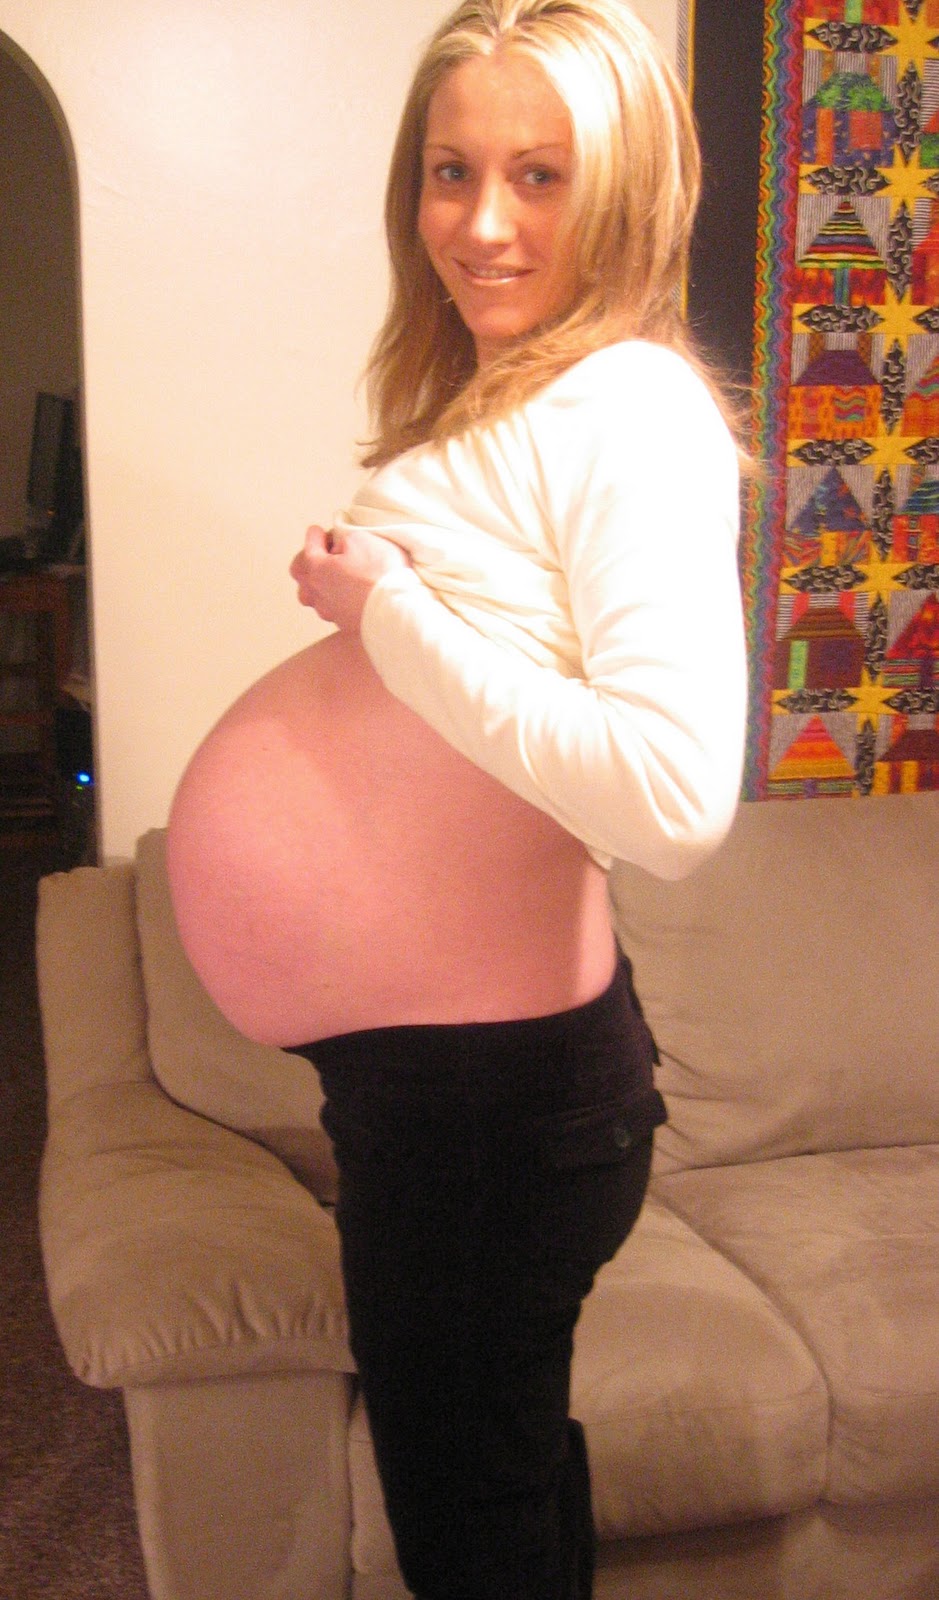 How big is the world's largest pregnant belly?